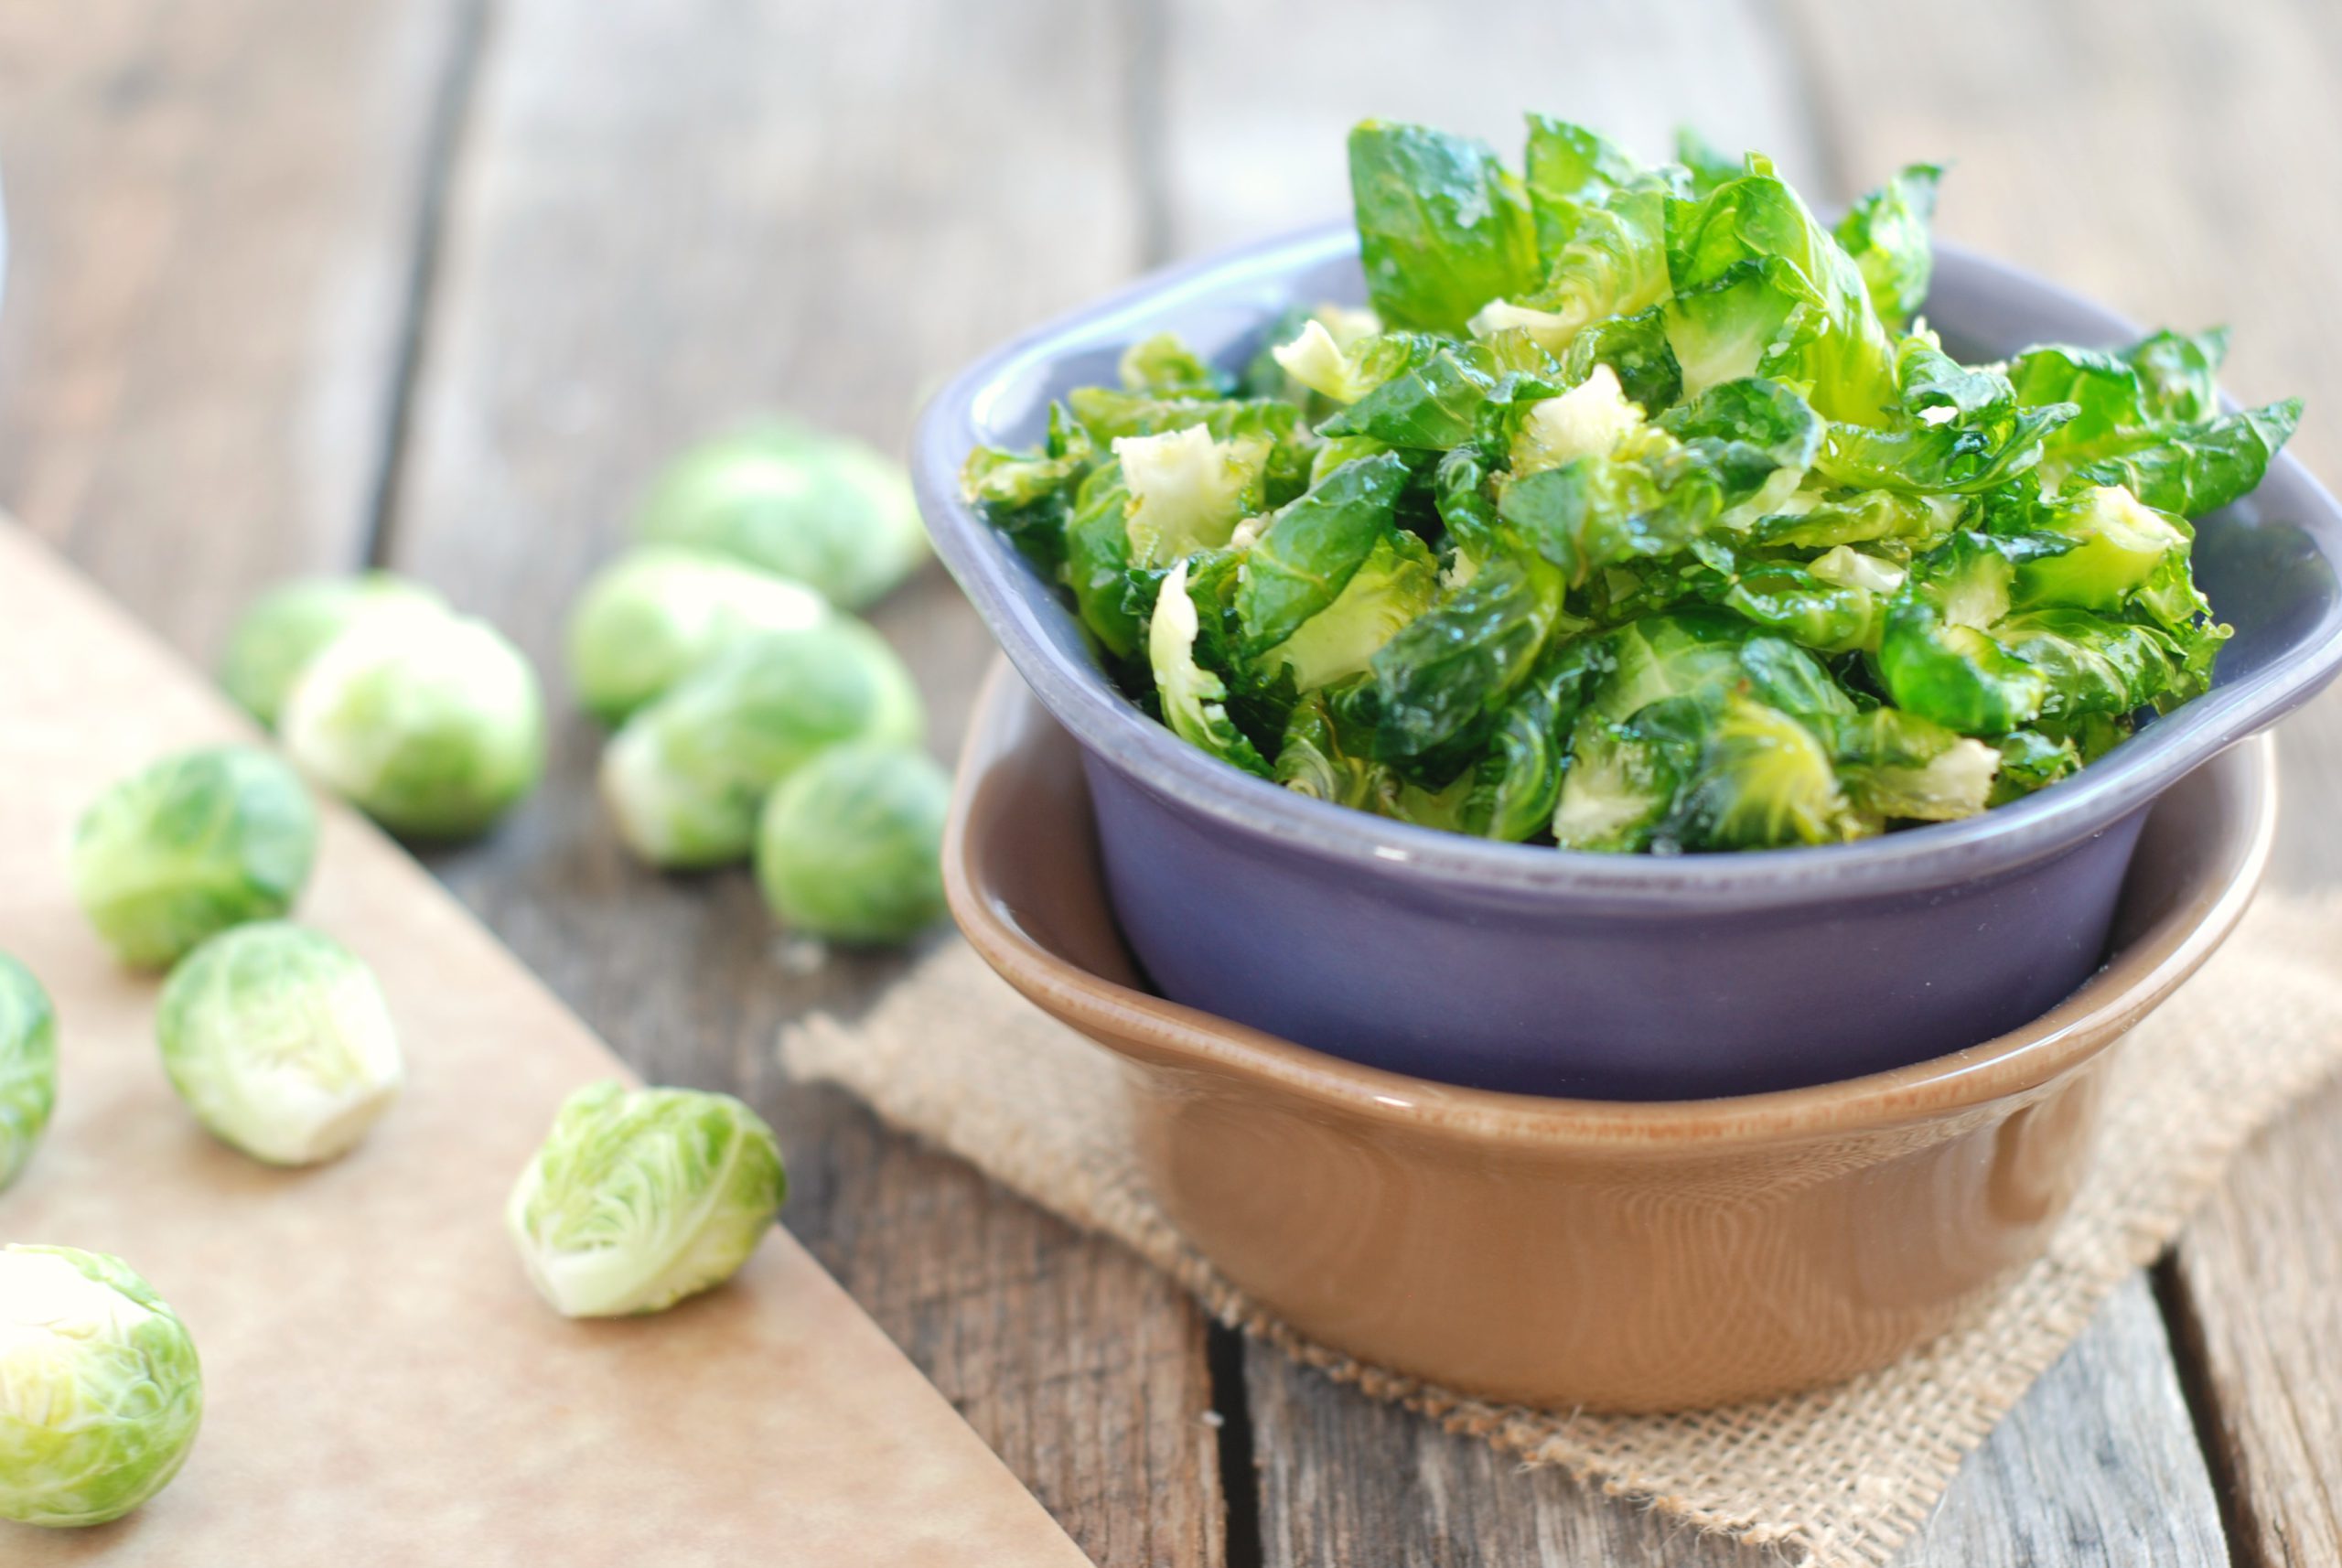 How to Make Brussels Sprouts Chips